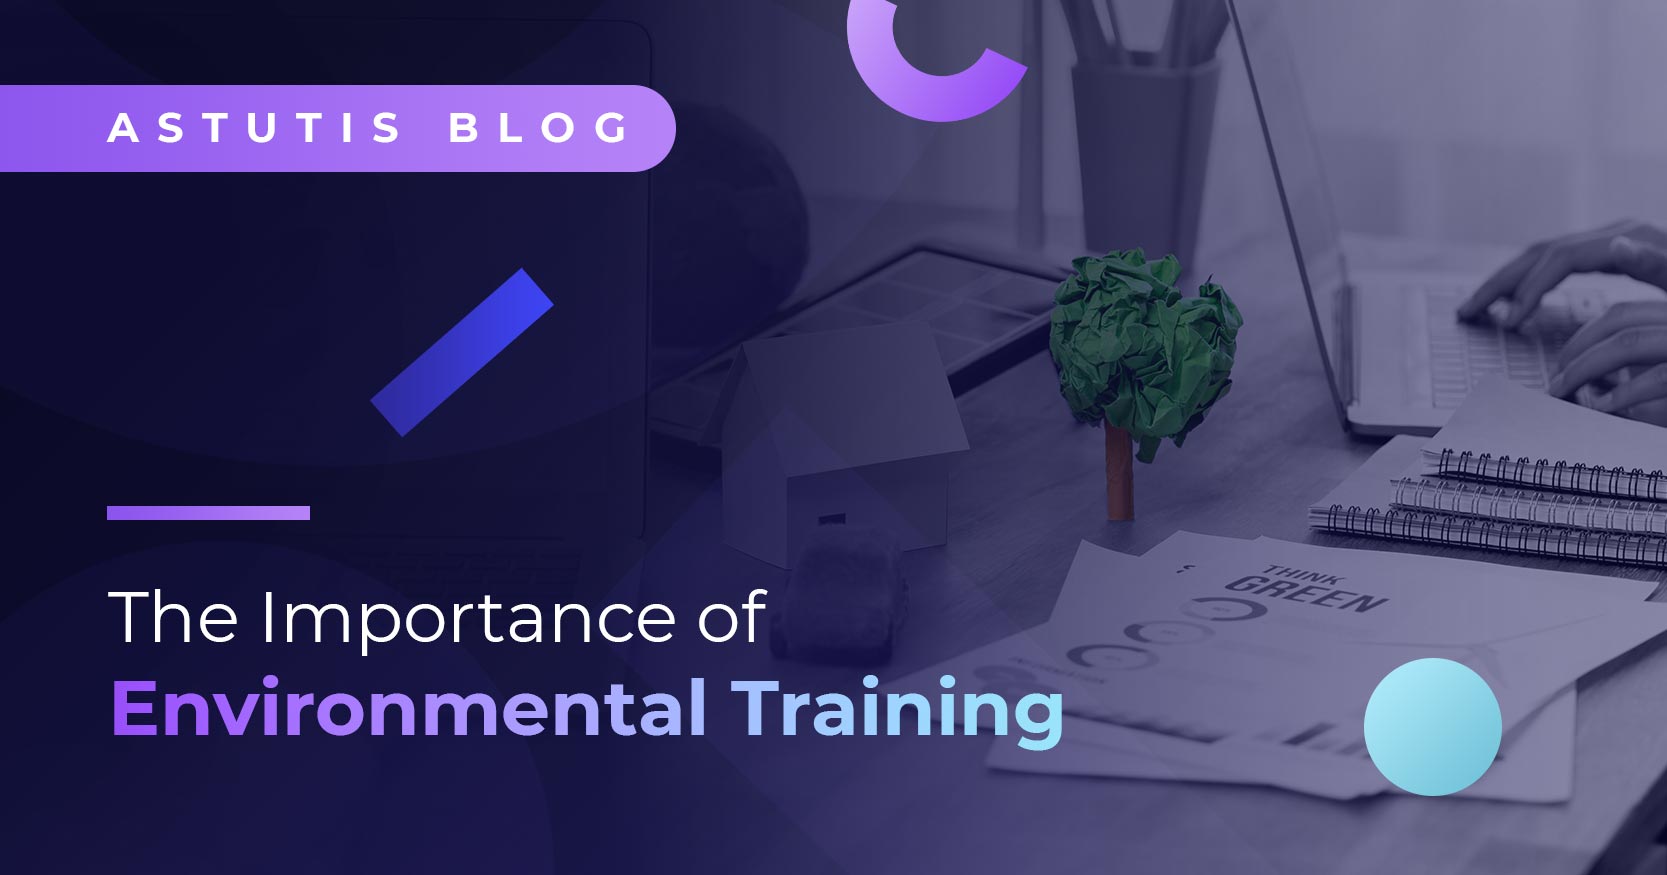 Is Environmental Training Important? Image